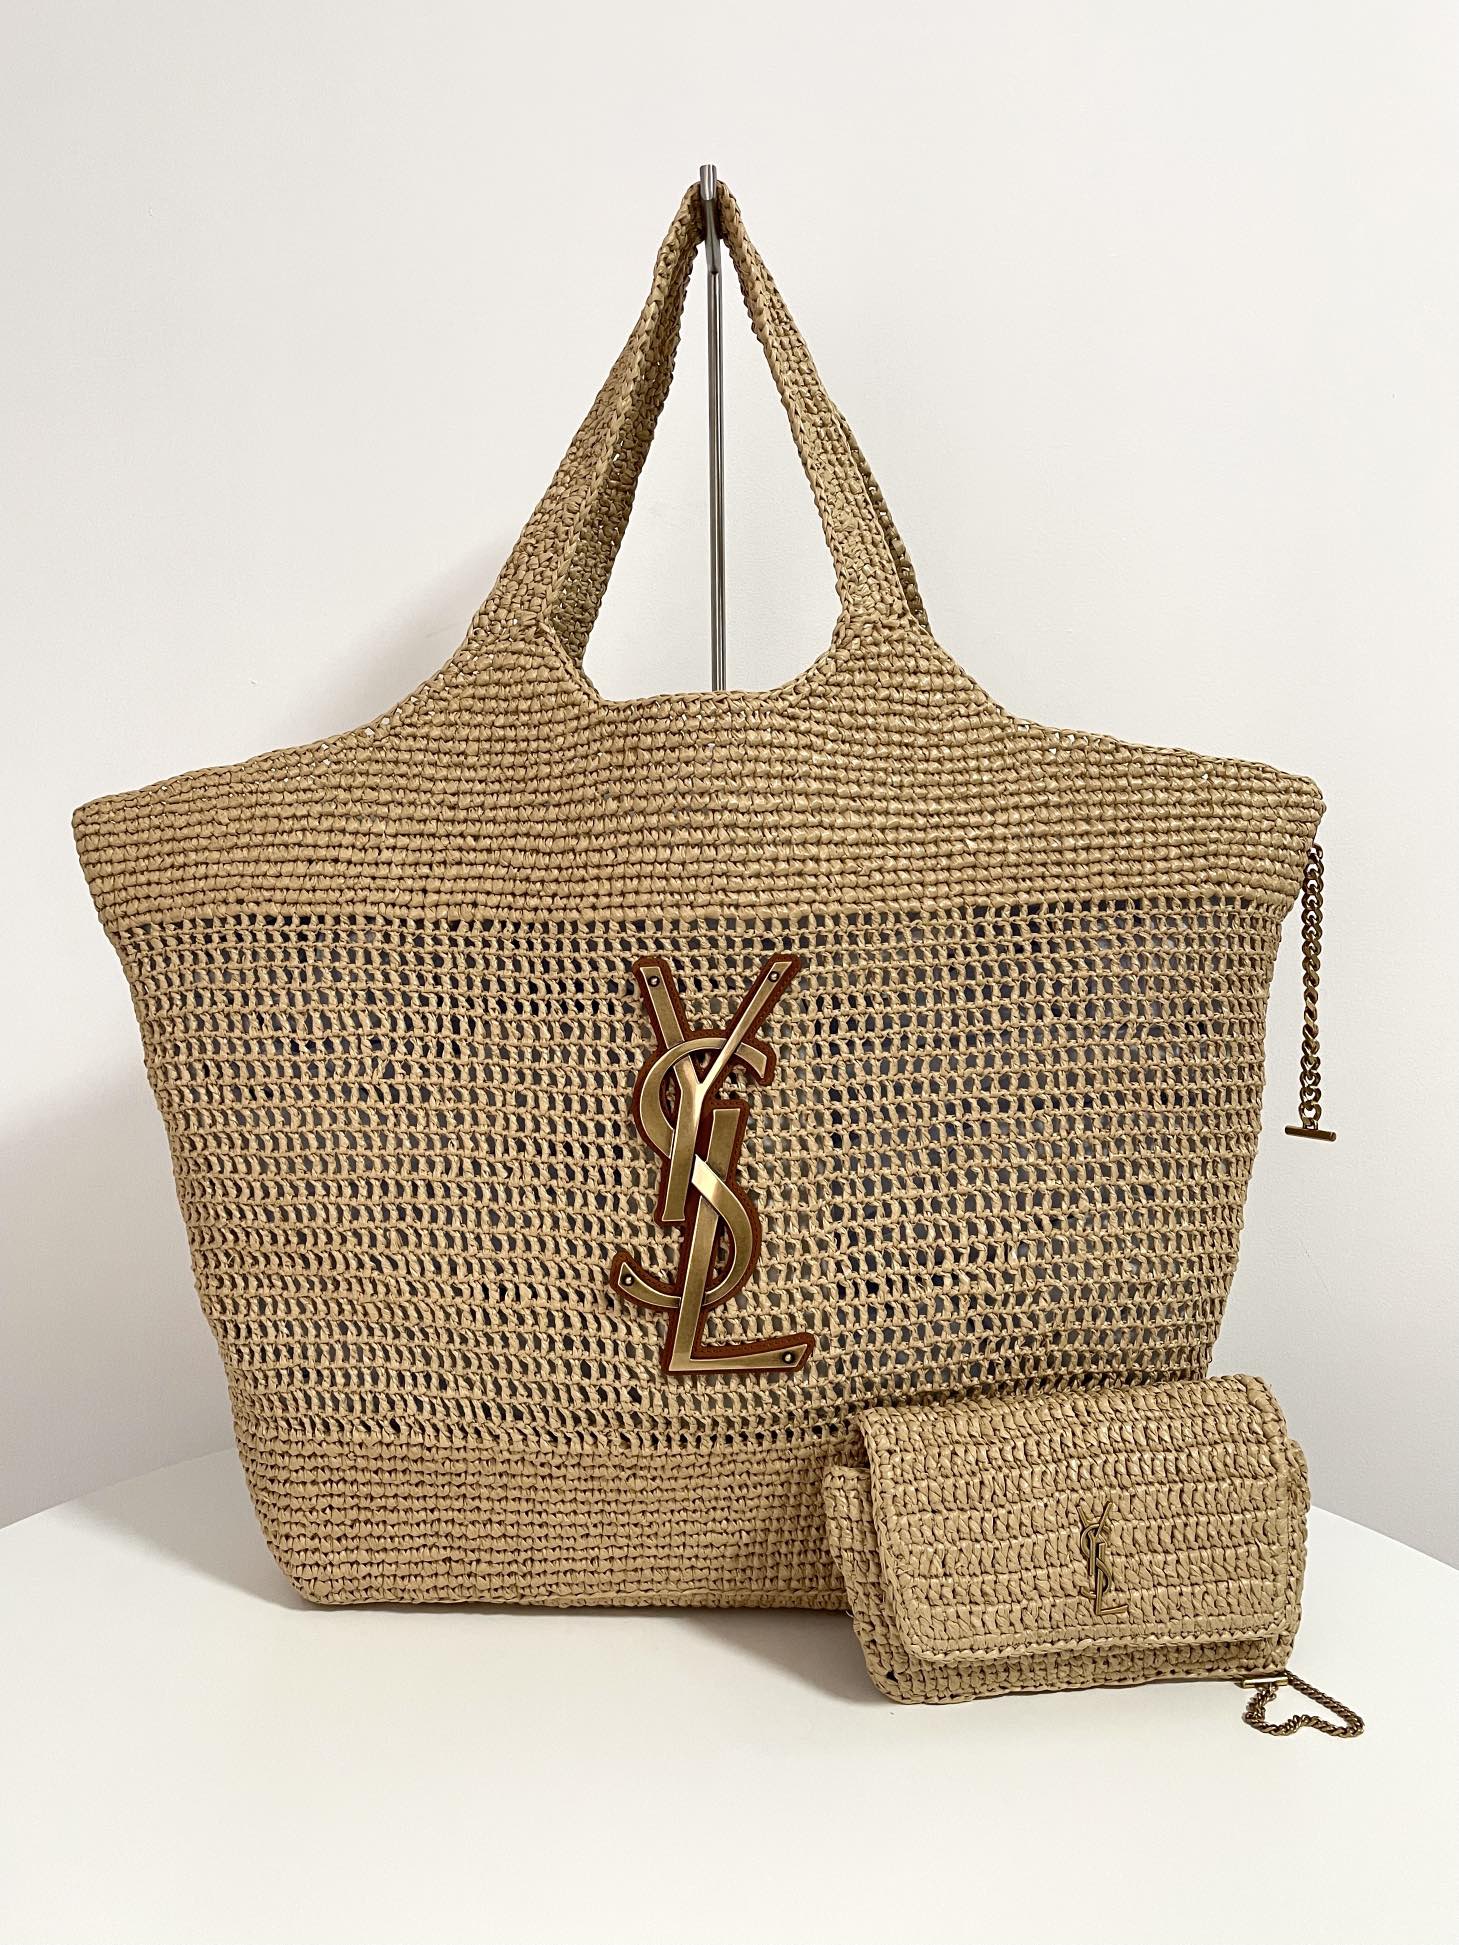 Yves Saint Laurent Bags Handbags Buy the Best High Quality Replica
 Raffia Straw Woven Spring/Summer Collection